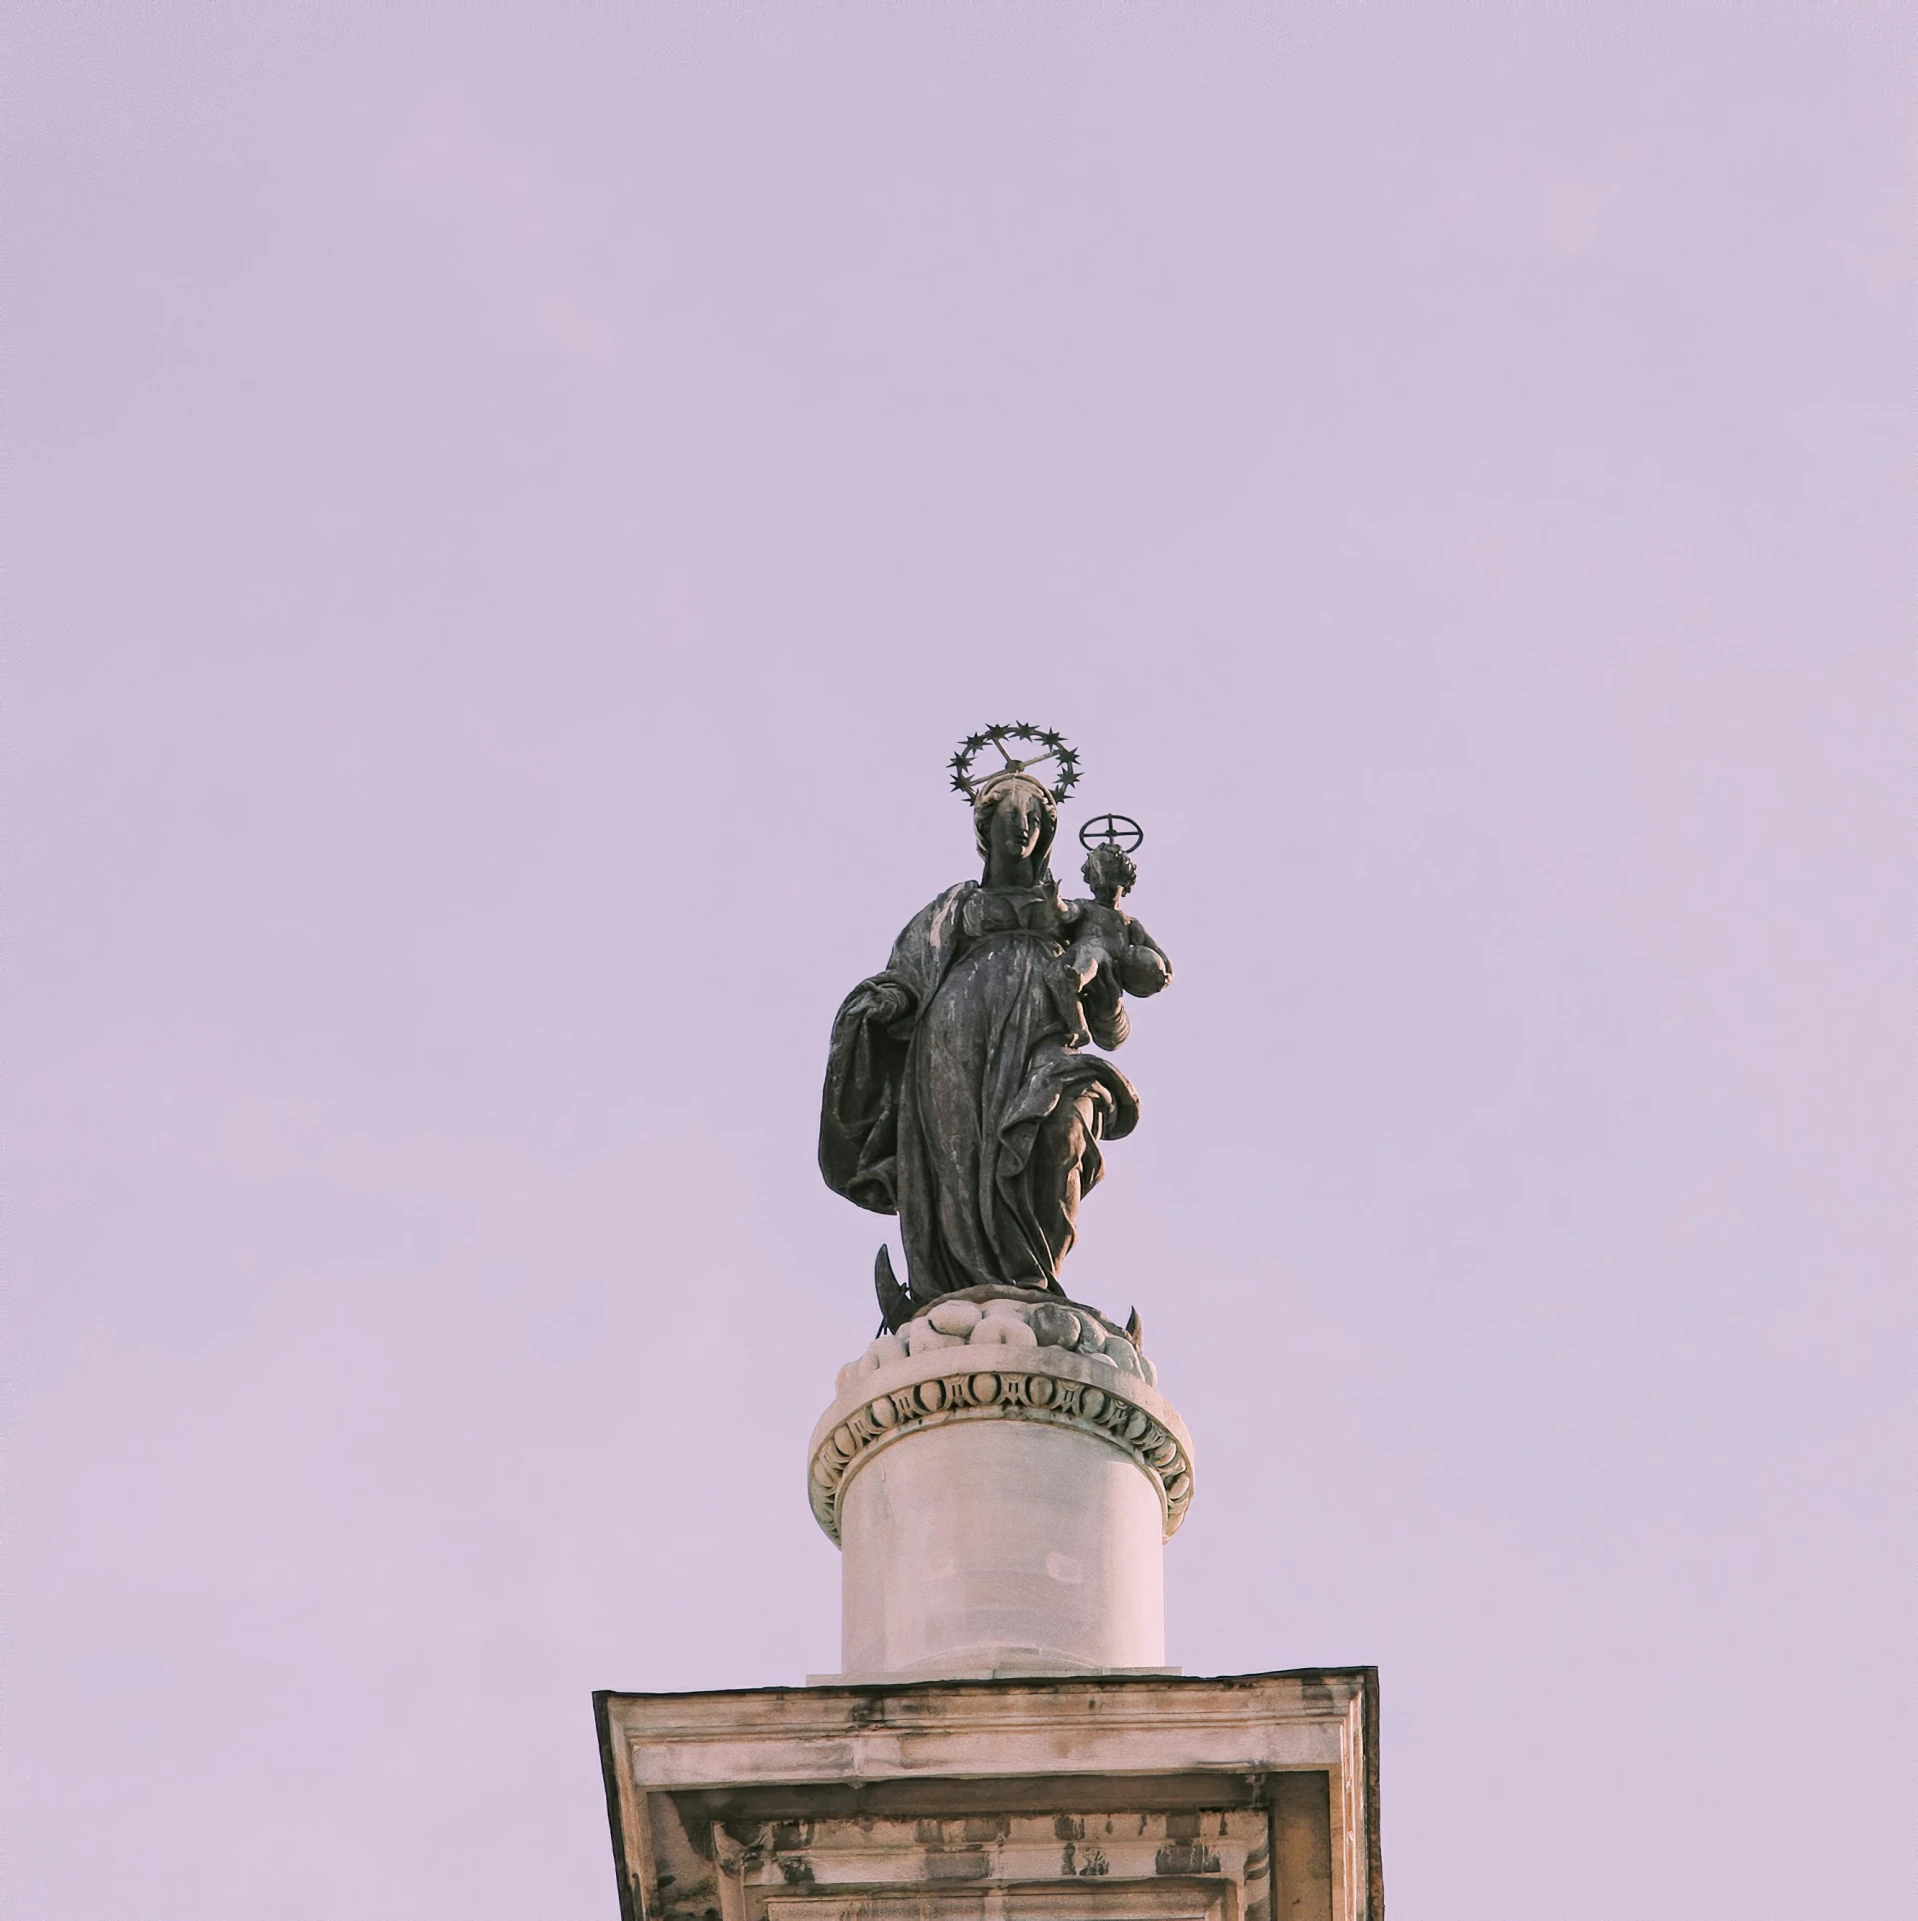 a statue is shown on top of a building